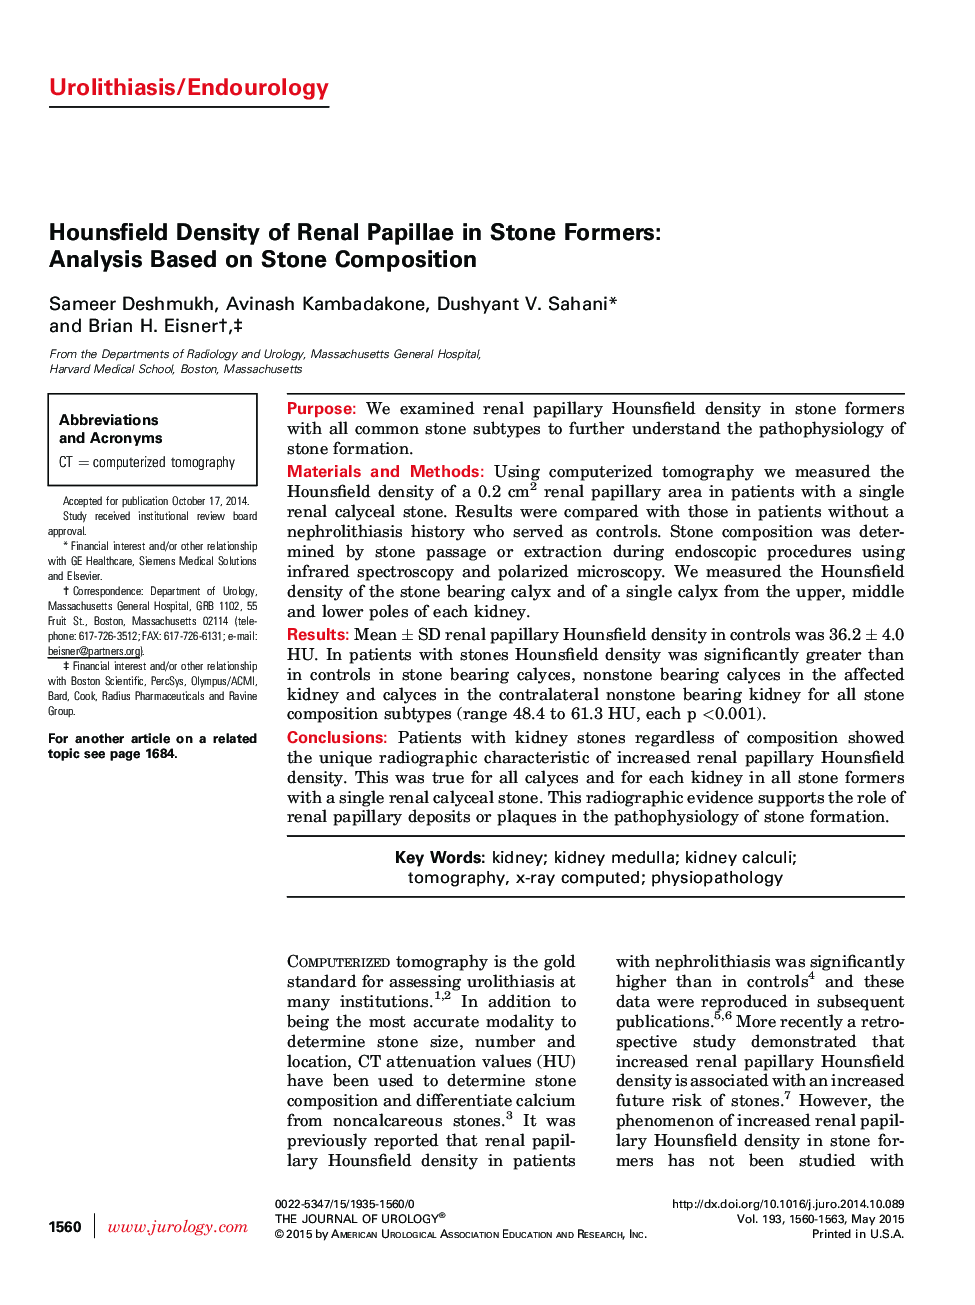 Hounsfield Density of Renal Papillae in Stone Formers: Analysis Based on Stone Composition